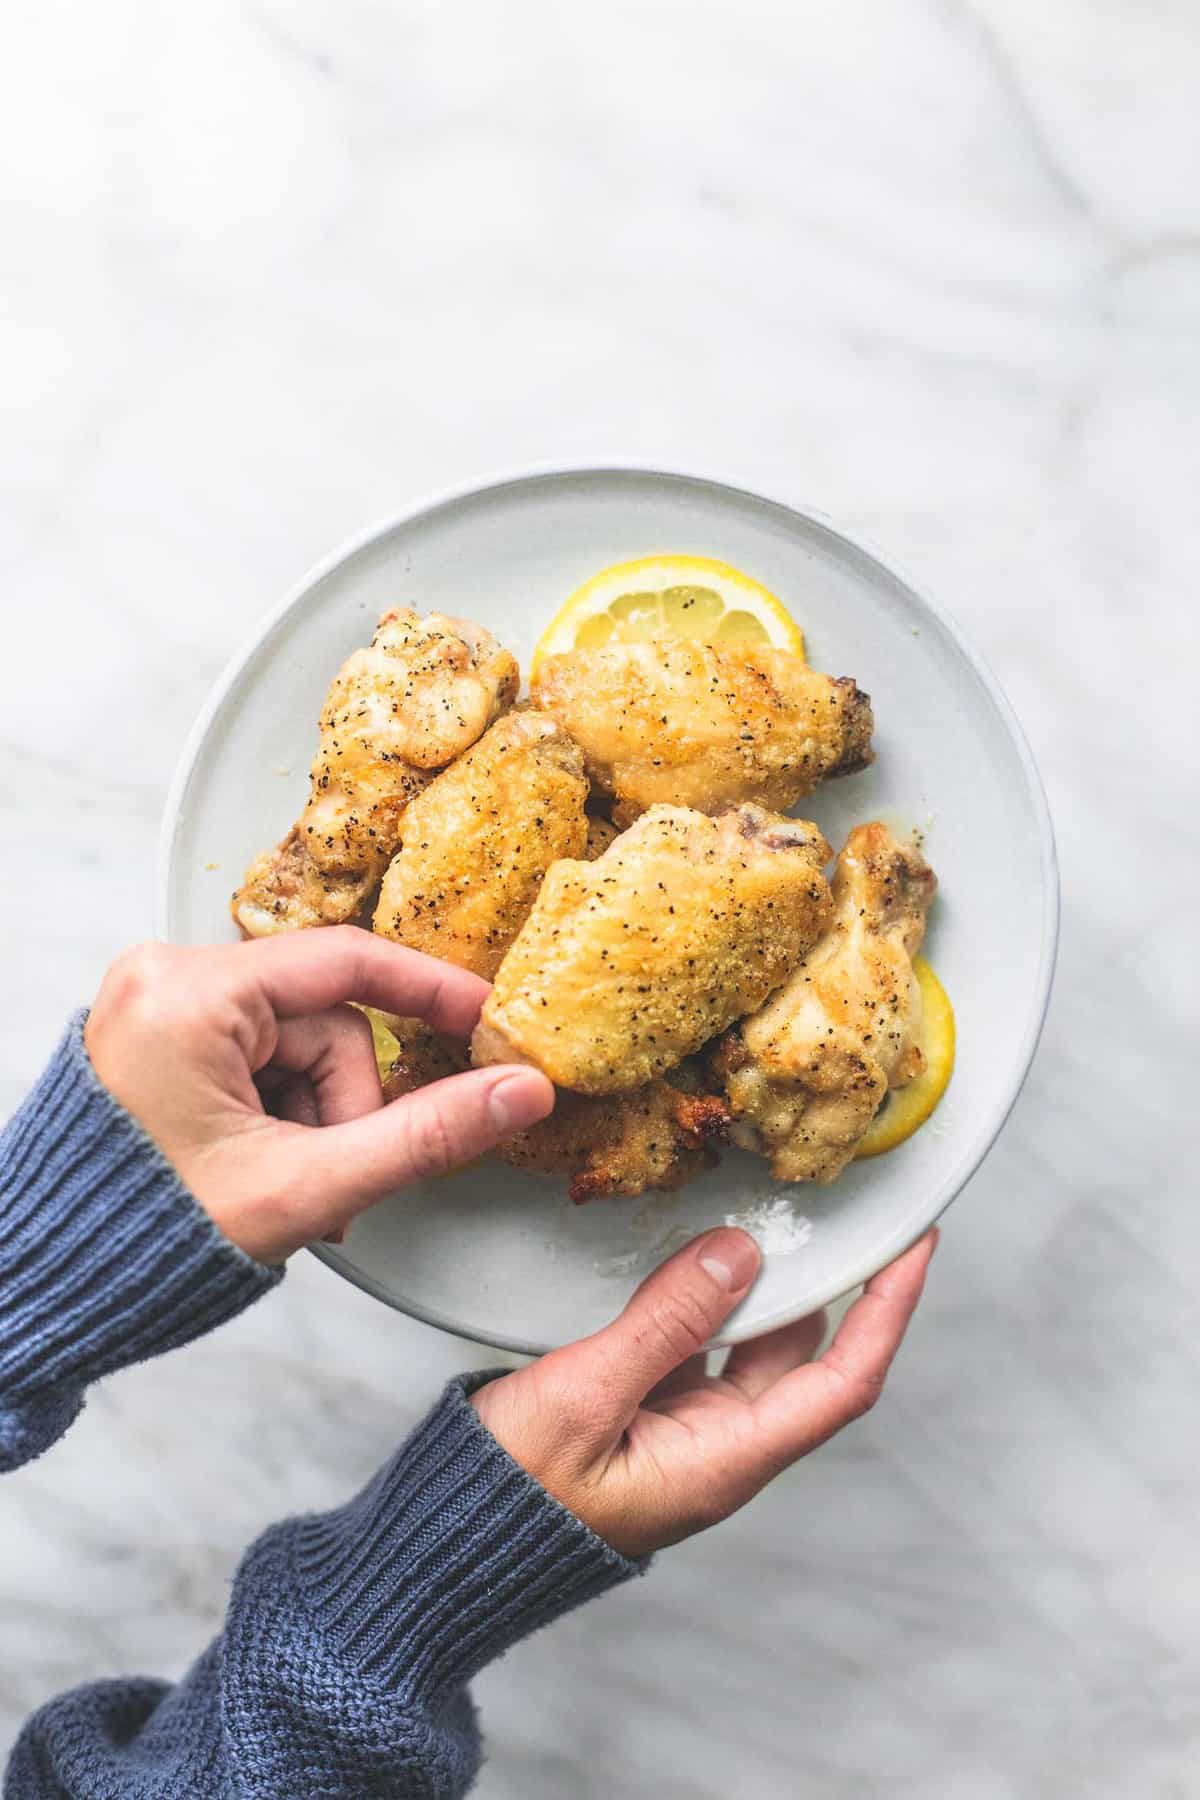 top view of a hand holding a plate of baked lemon pepper chicken wings with another hand grabbing a wing.